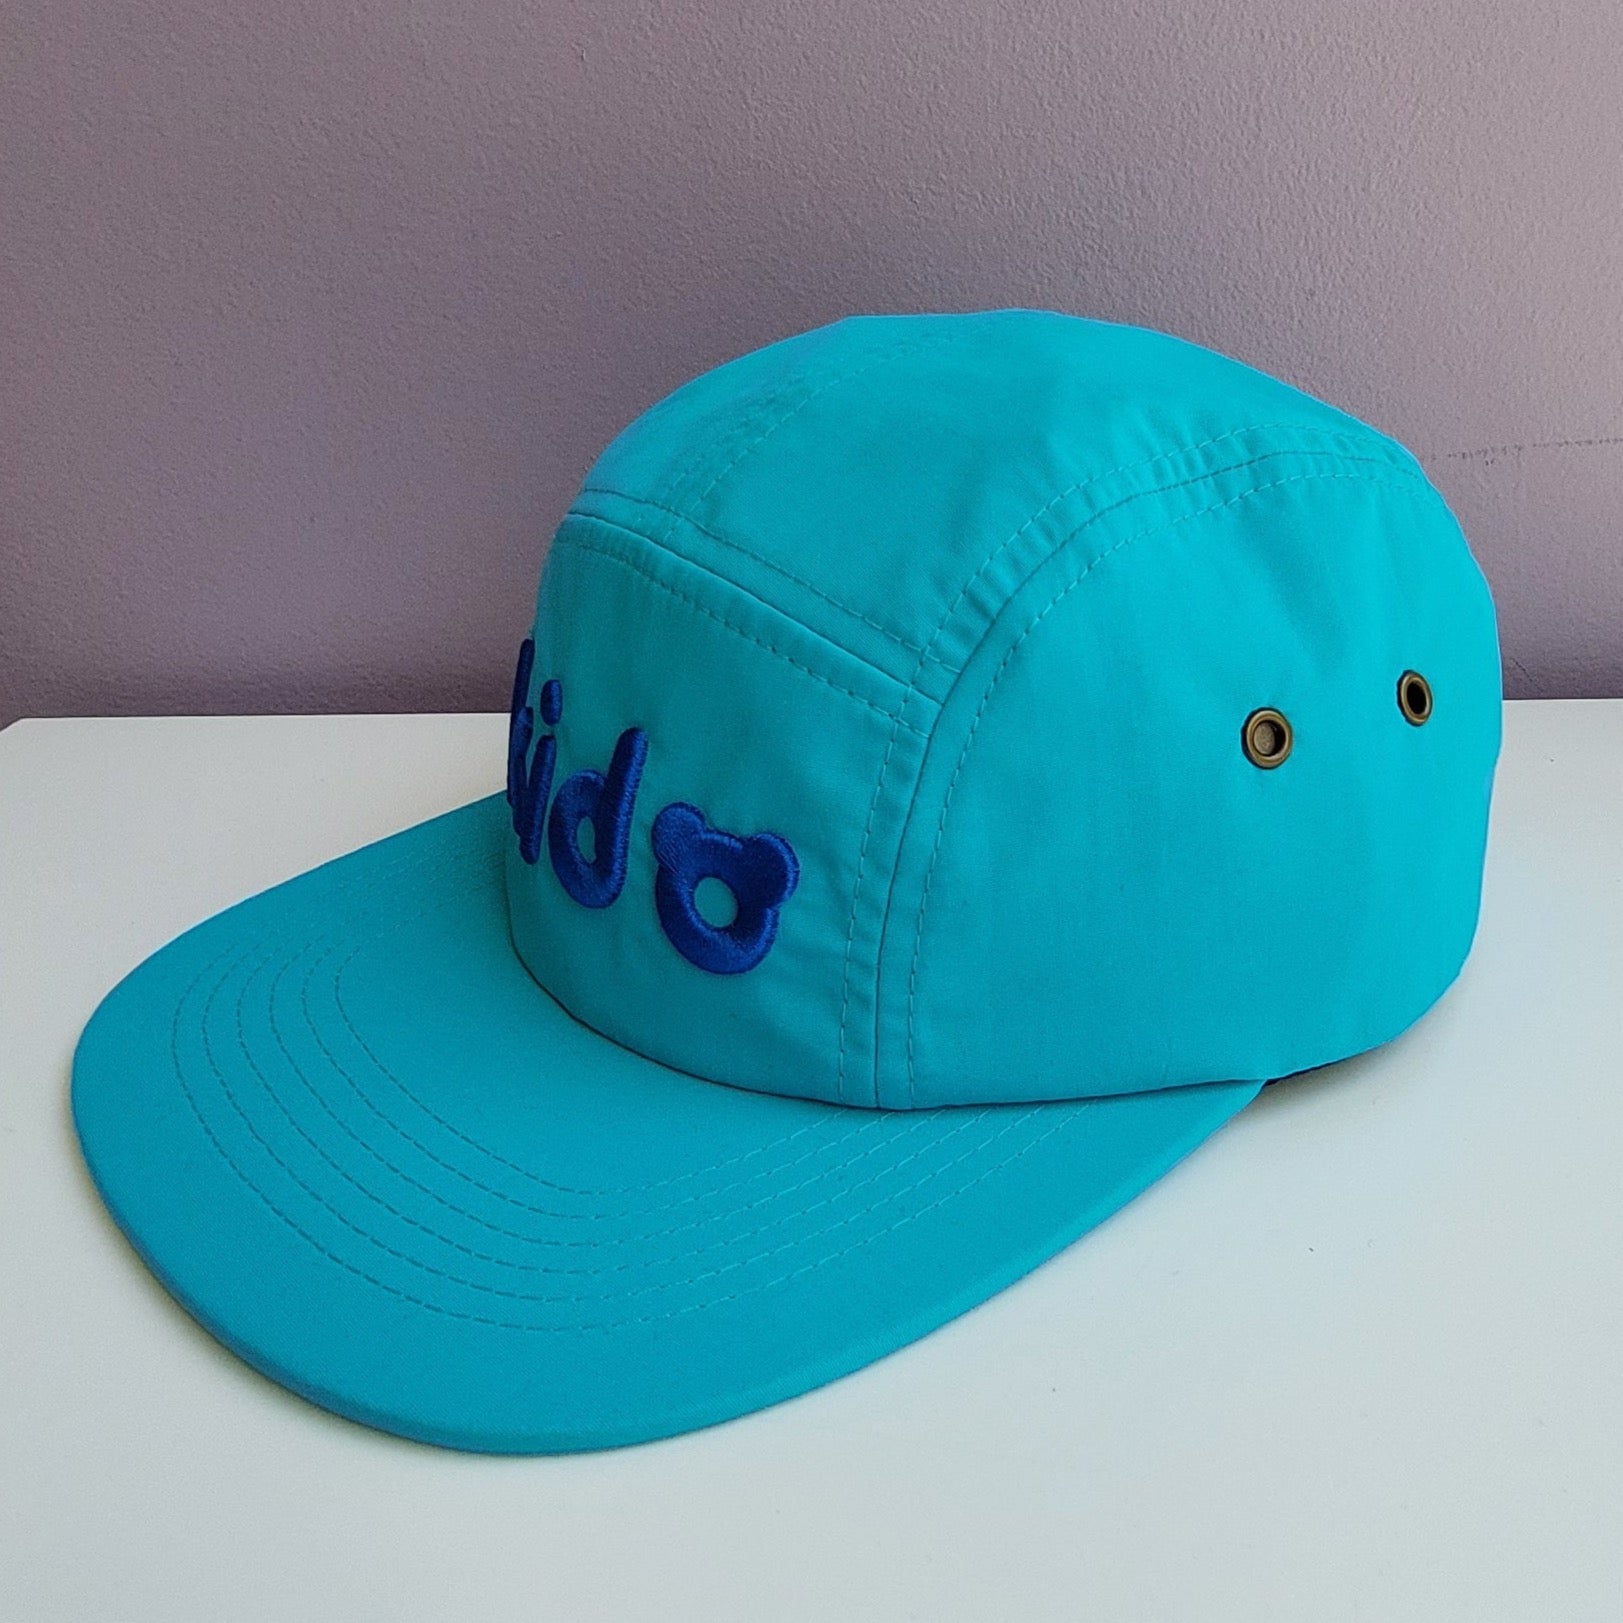 A bright blue 5 panel cap turned at a 45 degree angle sits on a white surface with a light purple background. The Kido logo is embroidered across the front in darker blue thread.